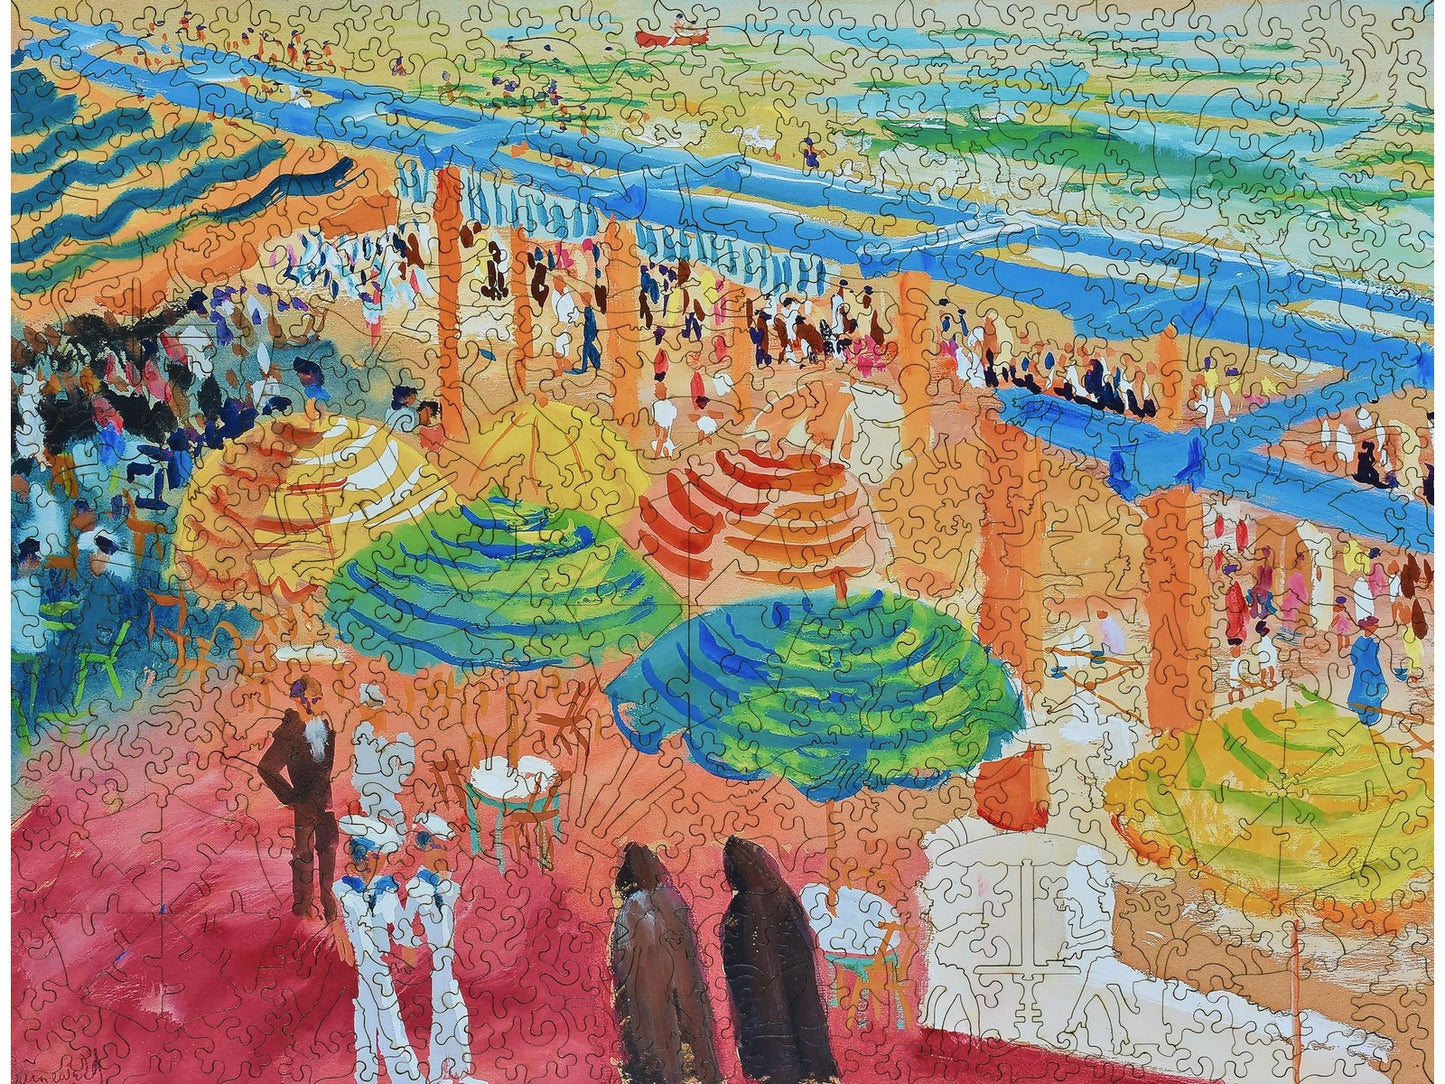 The front of the puzzle, The Blue Pergola, which shows brightly colored umbrellas on a crowded beach.